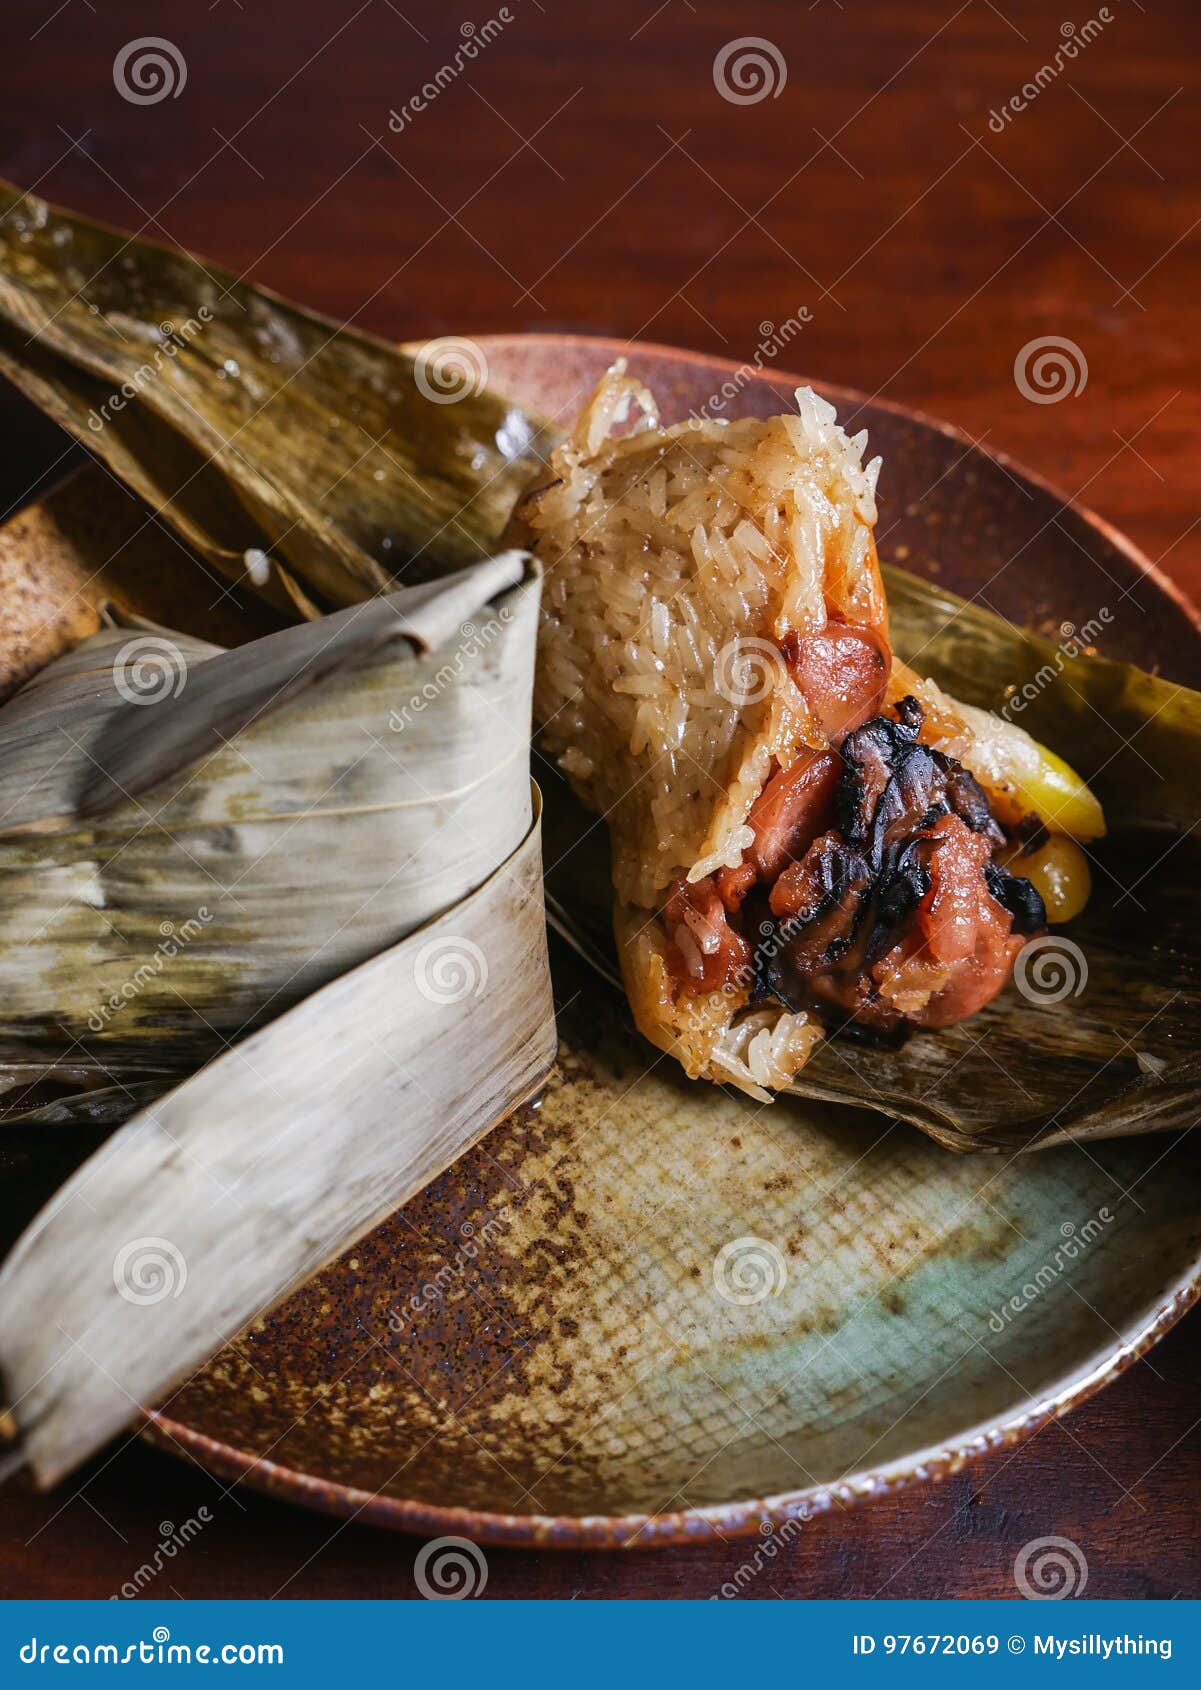 Chinese Leaf-wrapped Sticky Rice Zongzi Stock Image - Image of leaves ...